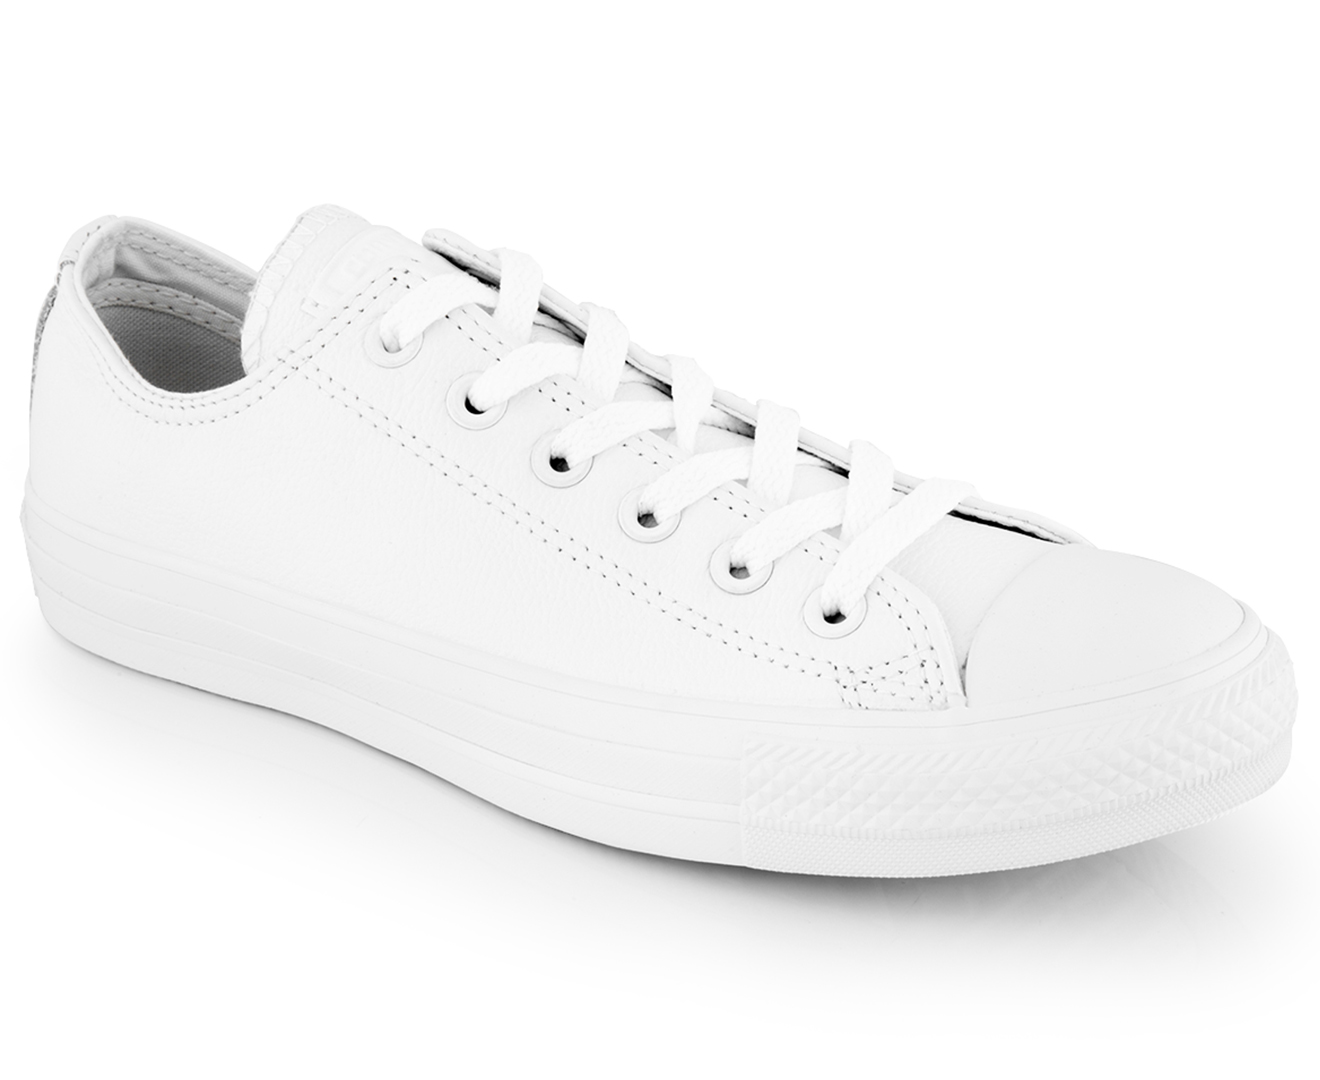 Converse Unisex Chuck Taylor All Star Low Top Leather Sneakers - White ...